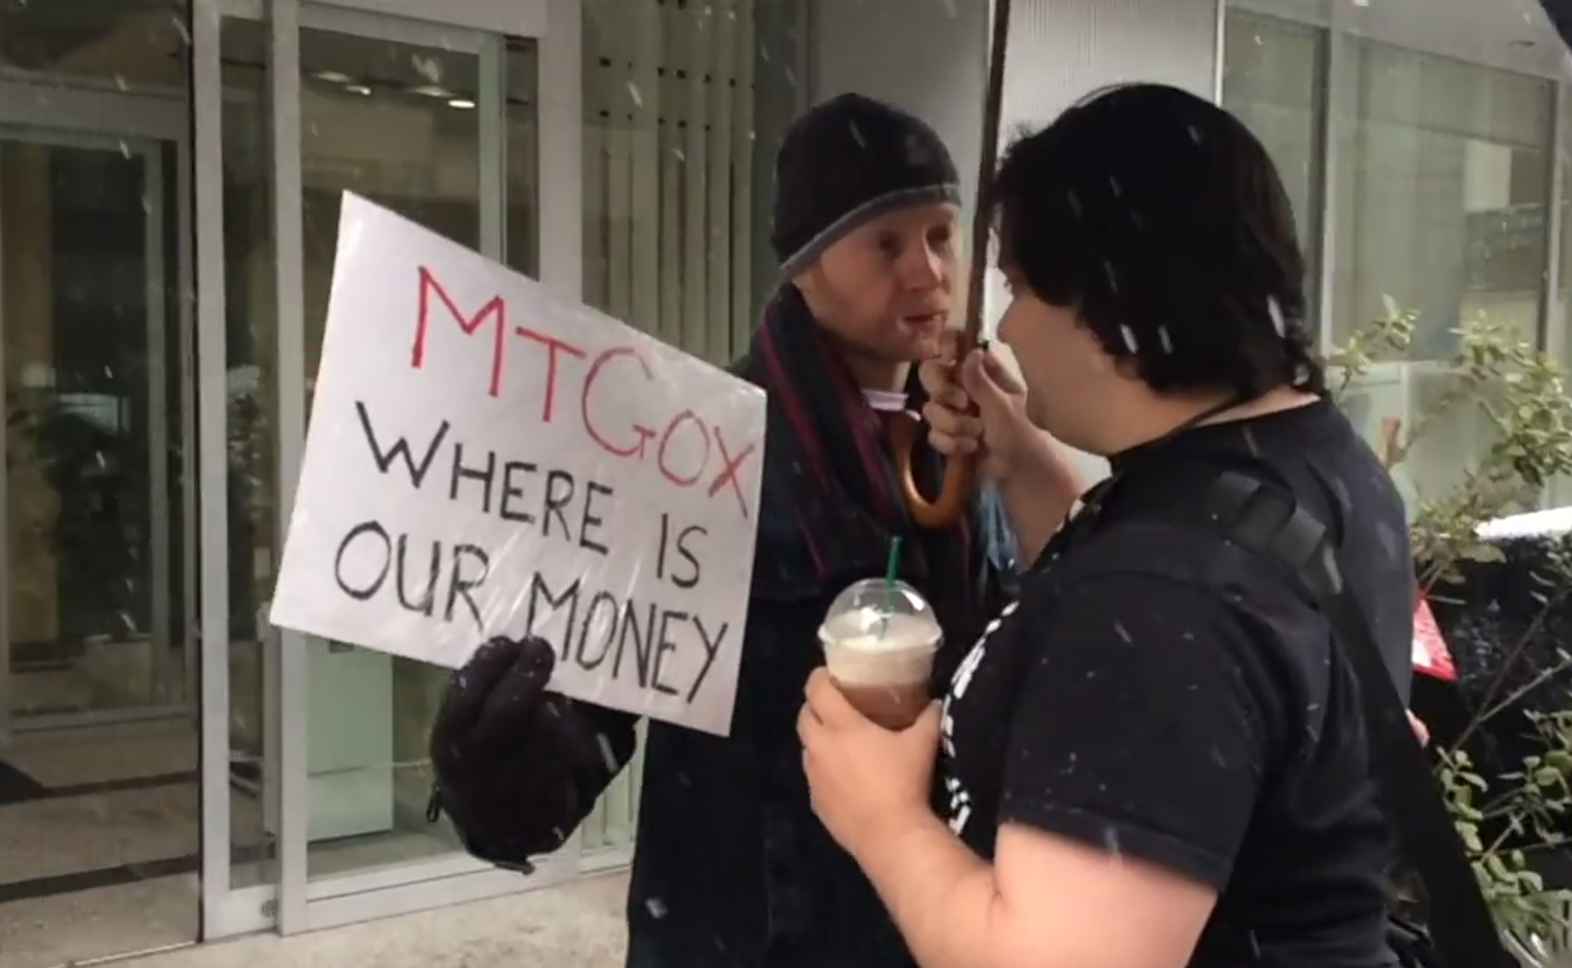 Mt gox finds missing bitcoins multiple cryptocurrency wallet